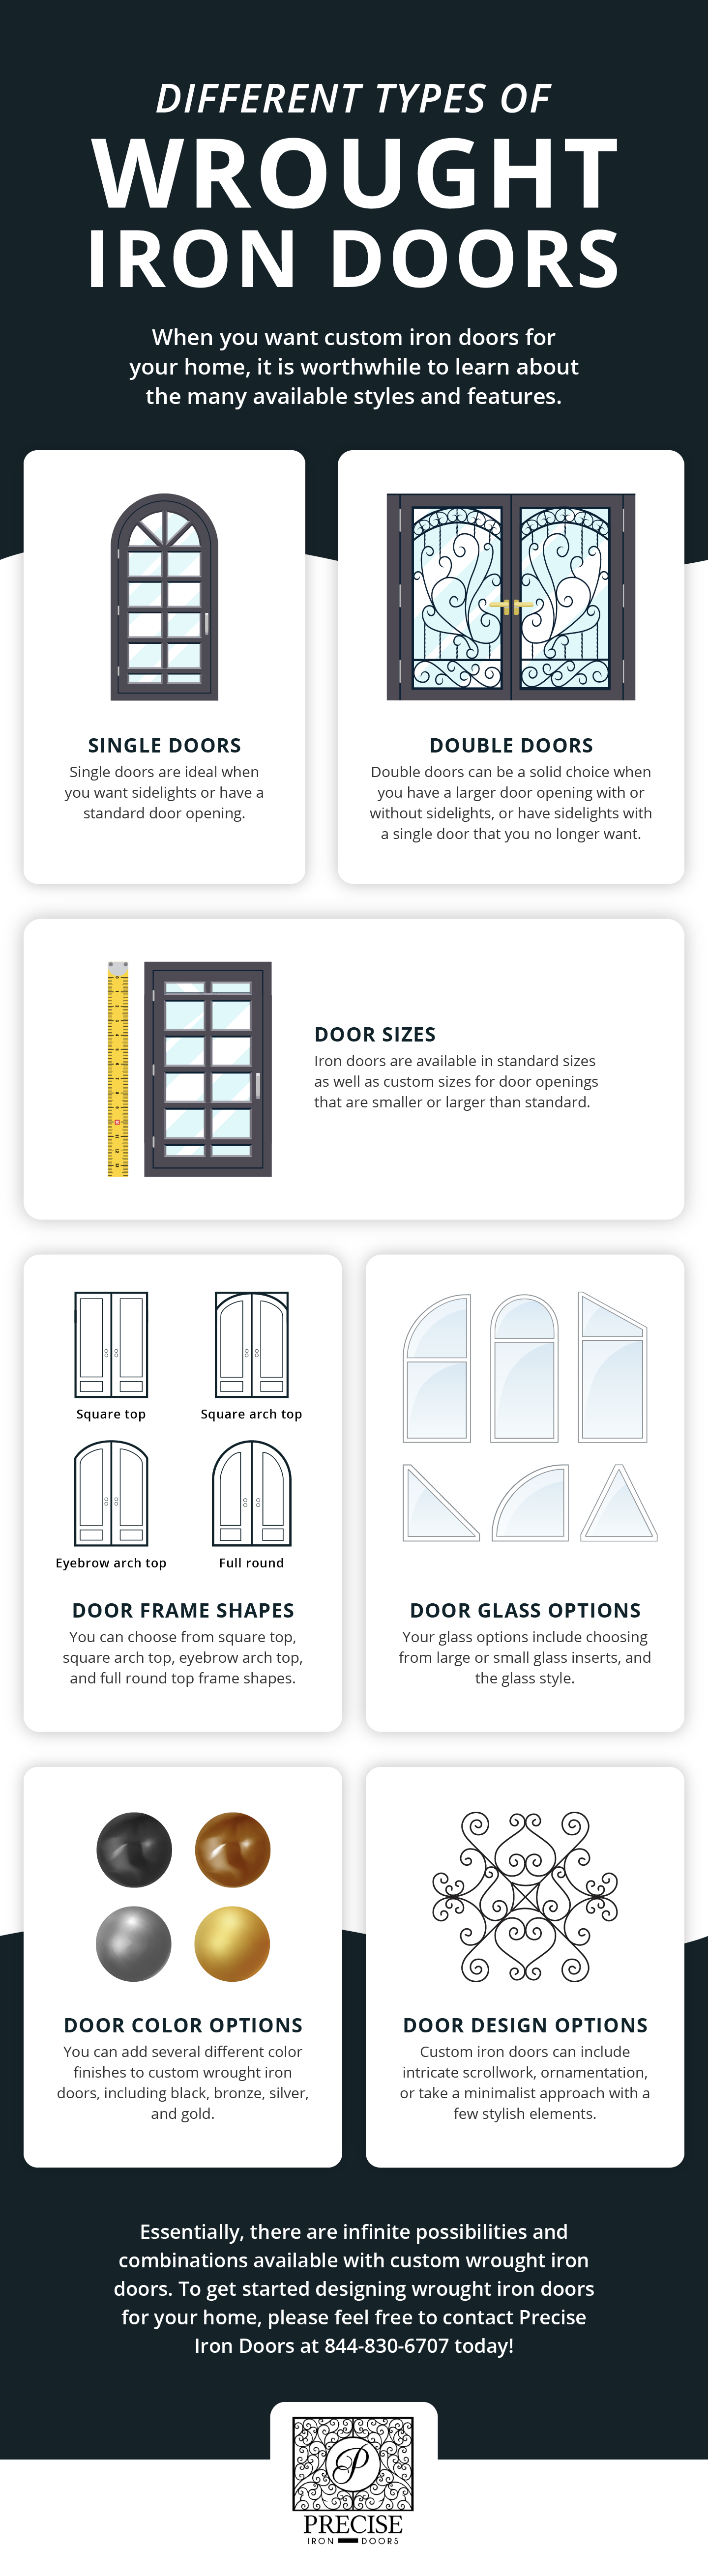 Different Types of Wrought Iron Doors Infographic